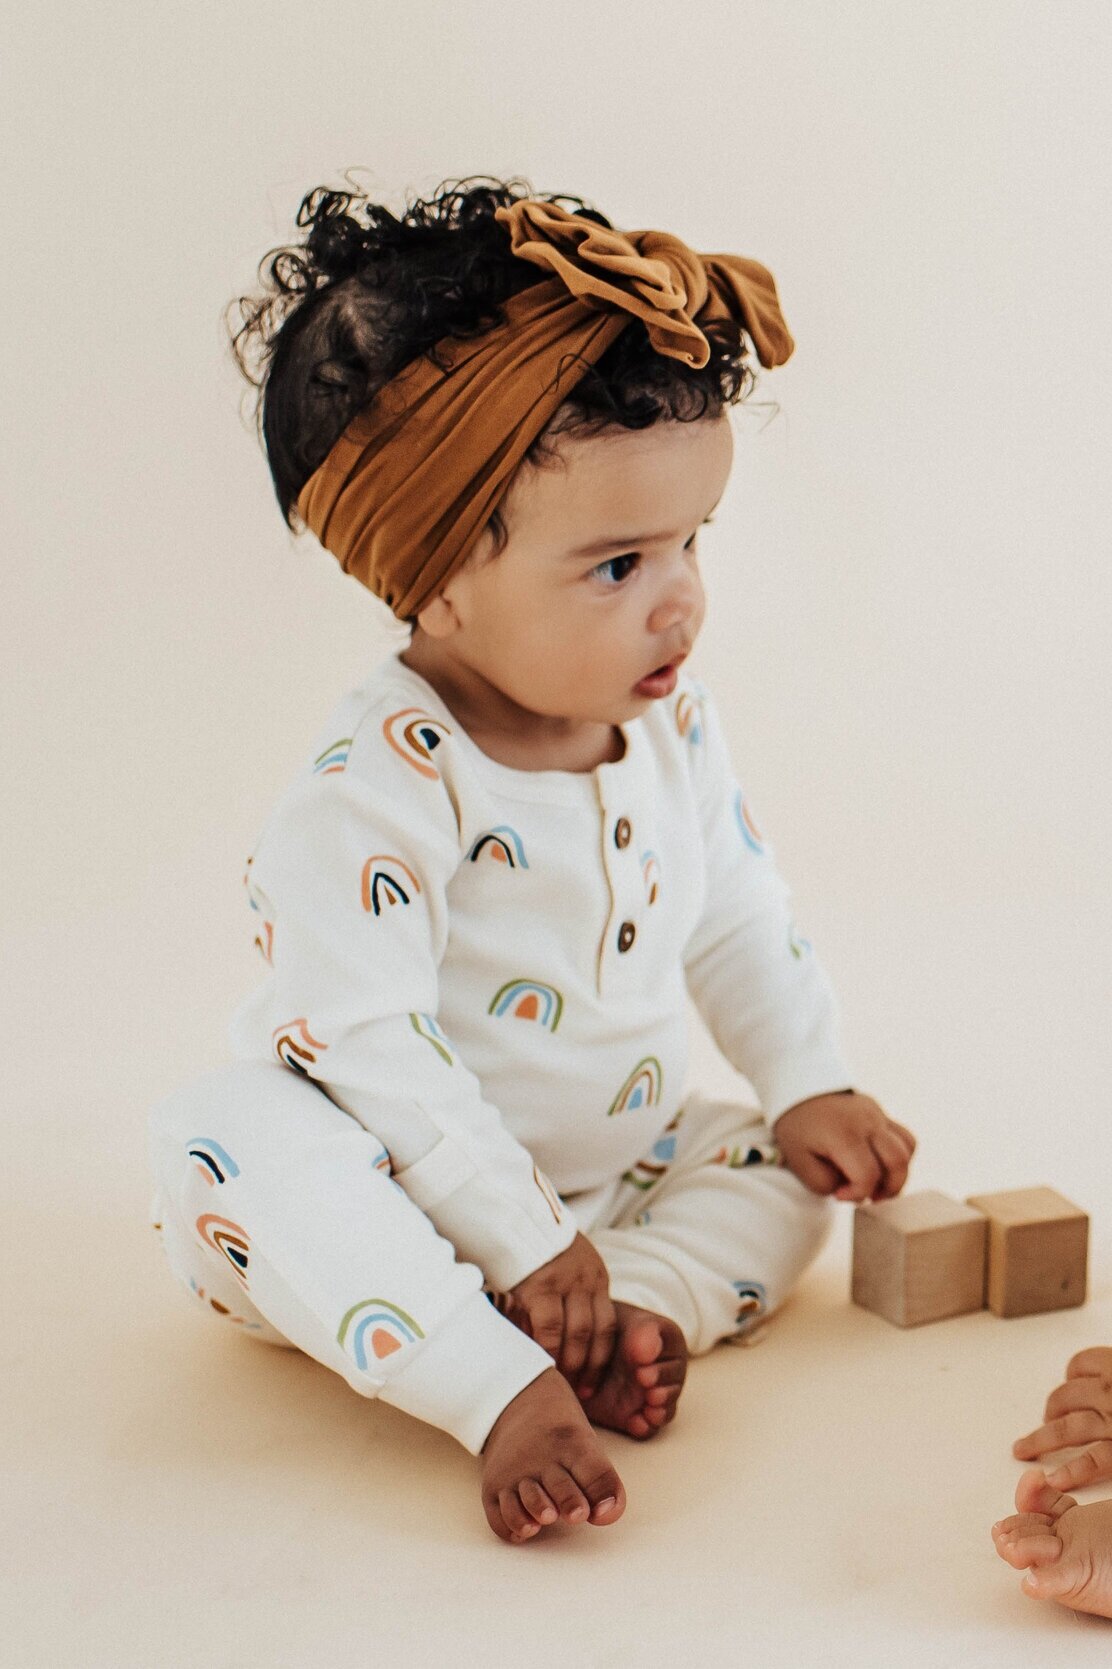 Best Organic Baby Clothes 2021, According To Moms